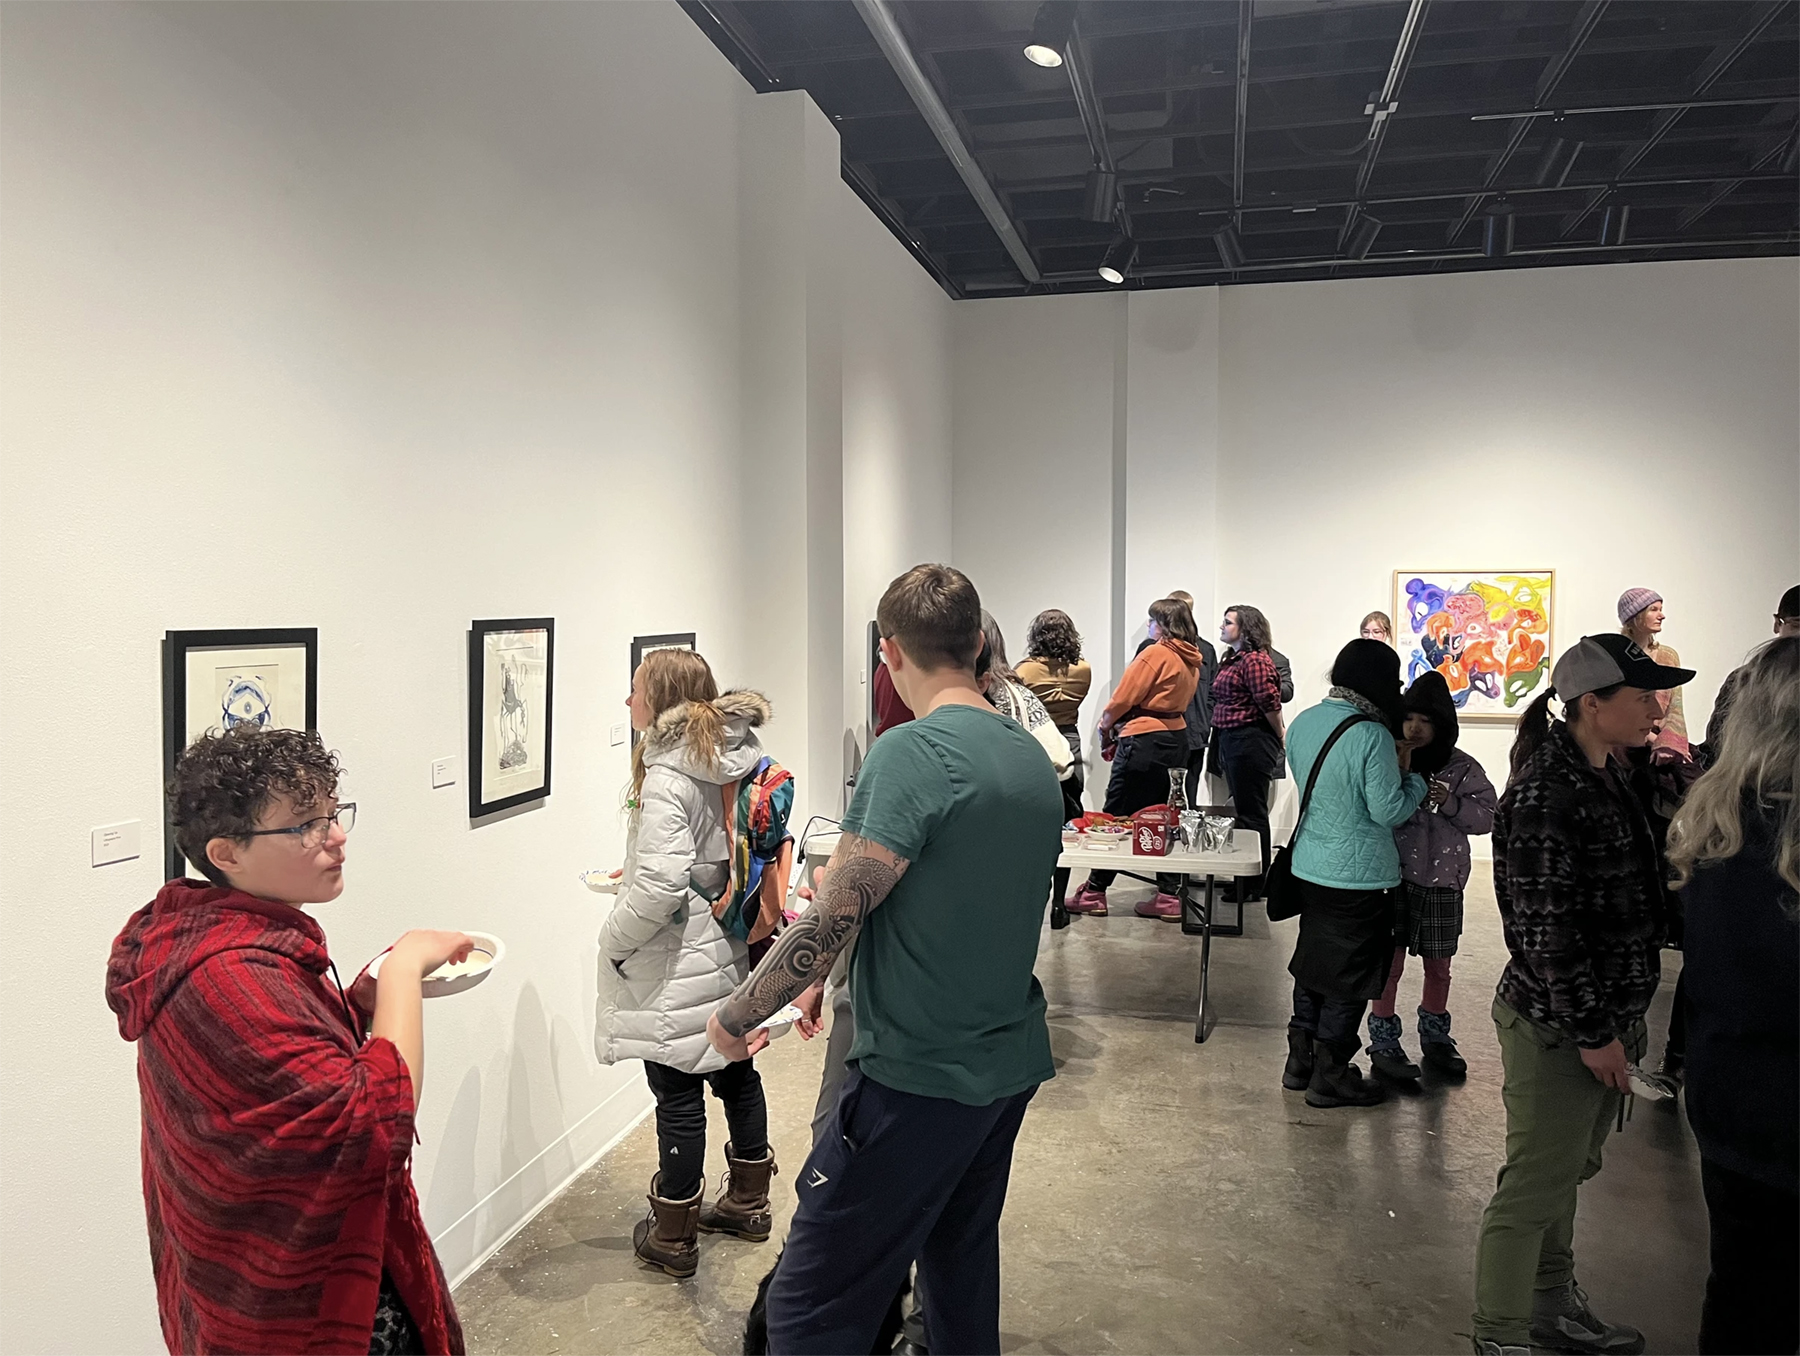 Image of the gallery during Chana Stern's "Pilgrimage of the Revenant" reception, courtesy of the artist